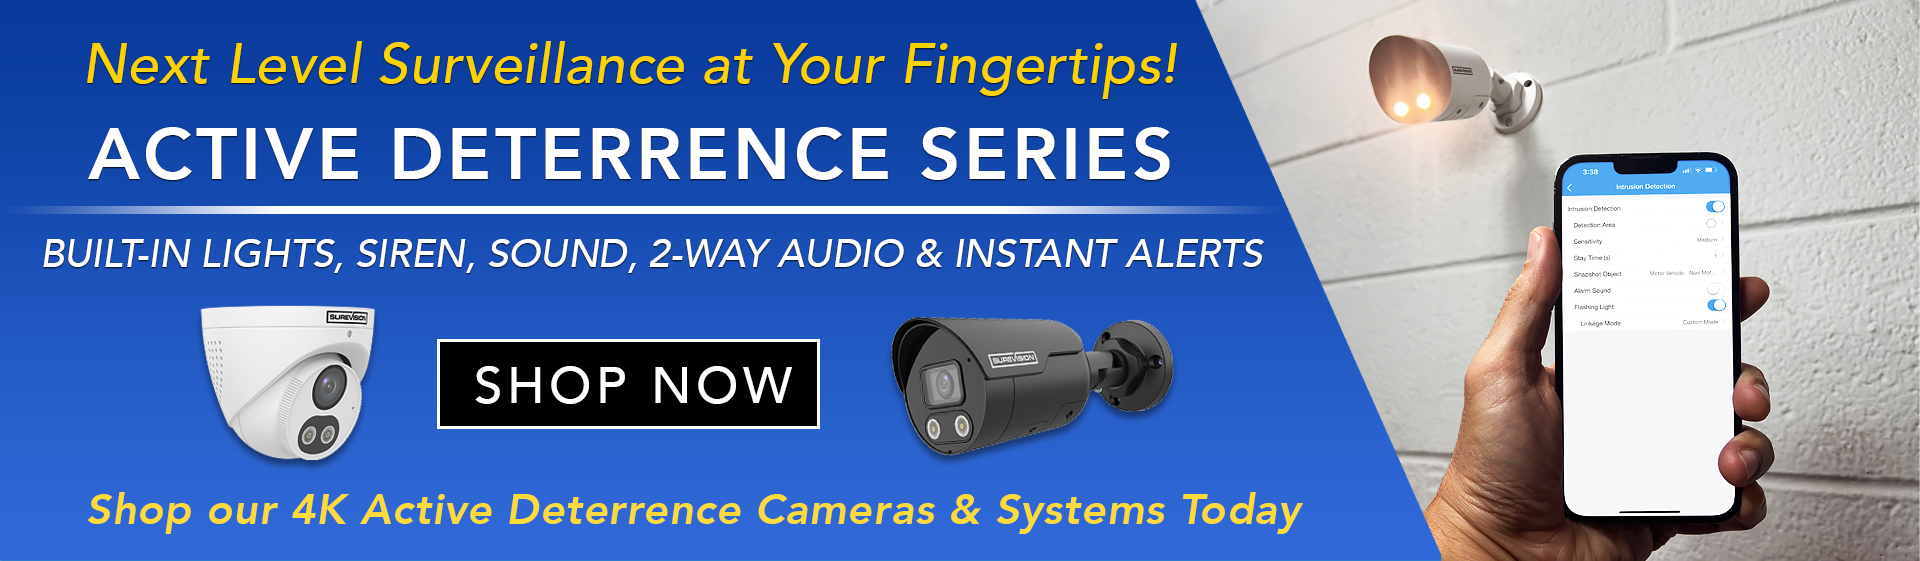 Aciive Deterrent Cameras and Systems with Lights and Alerts